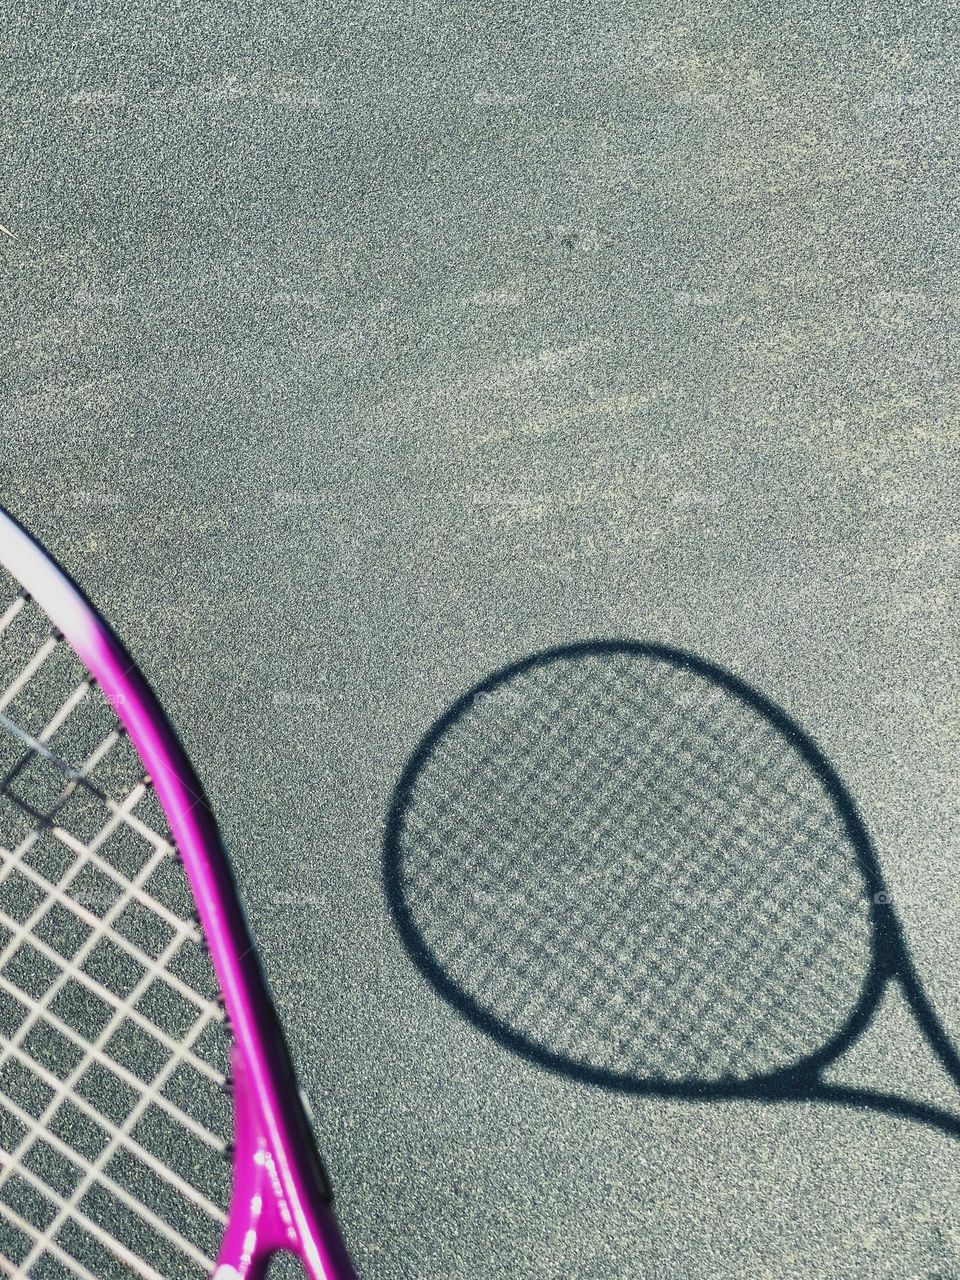 Purplish pink tennis racket and its shadow on clay courts.